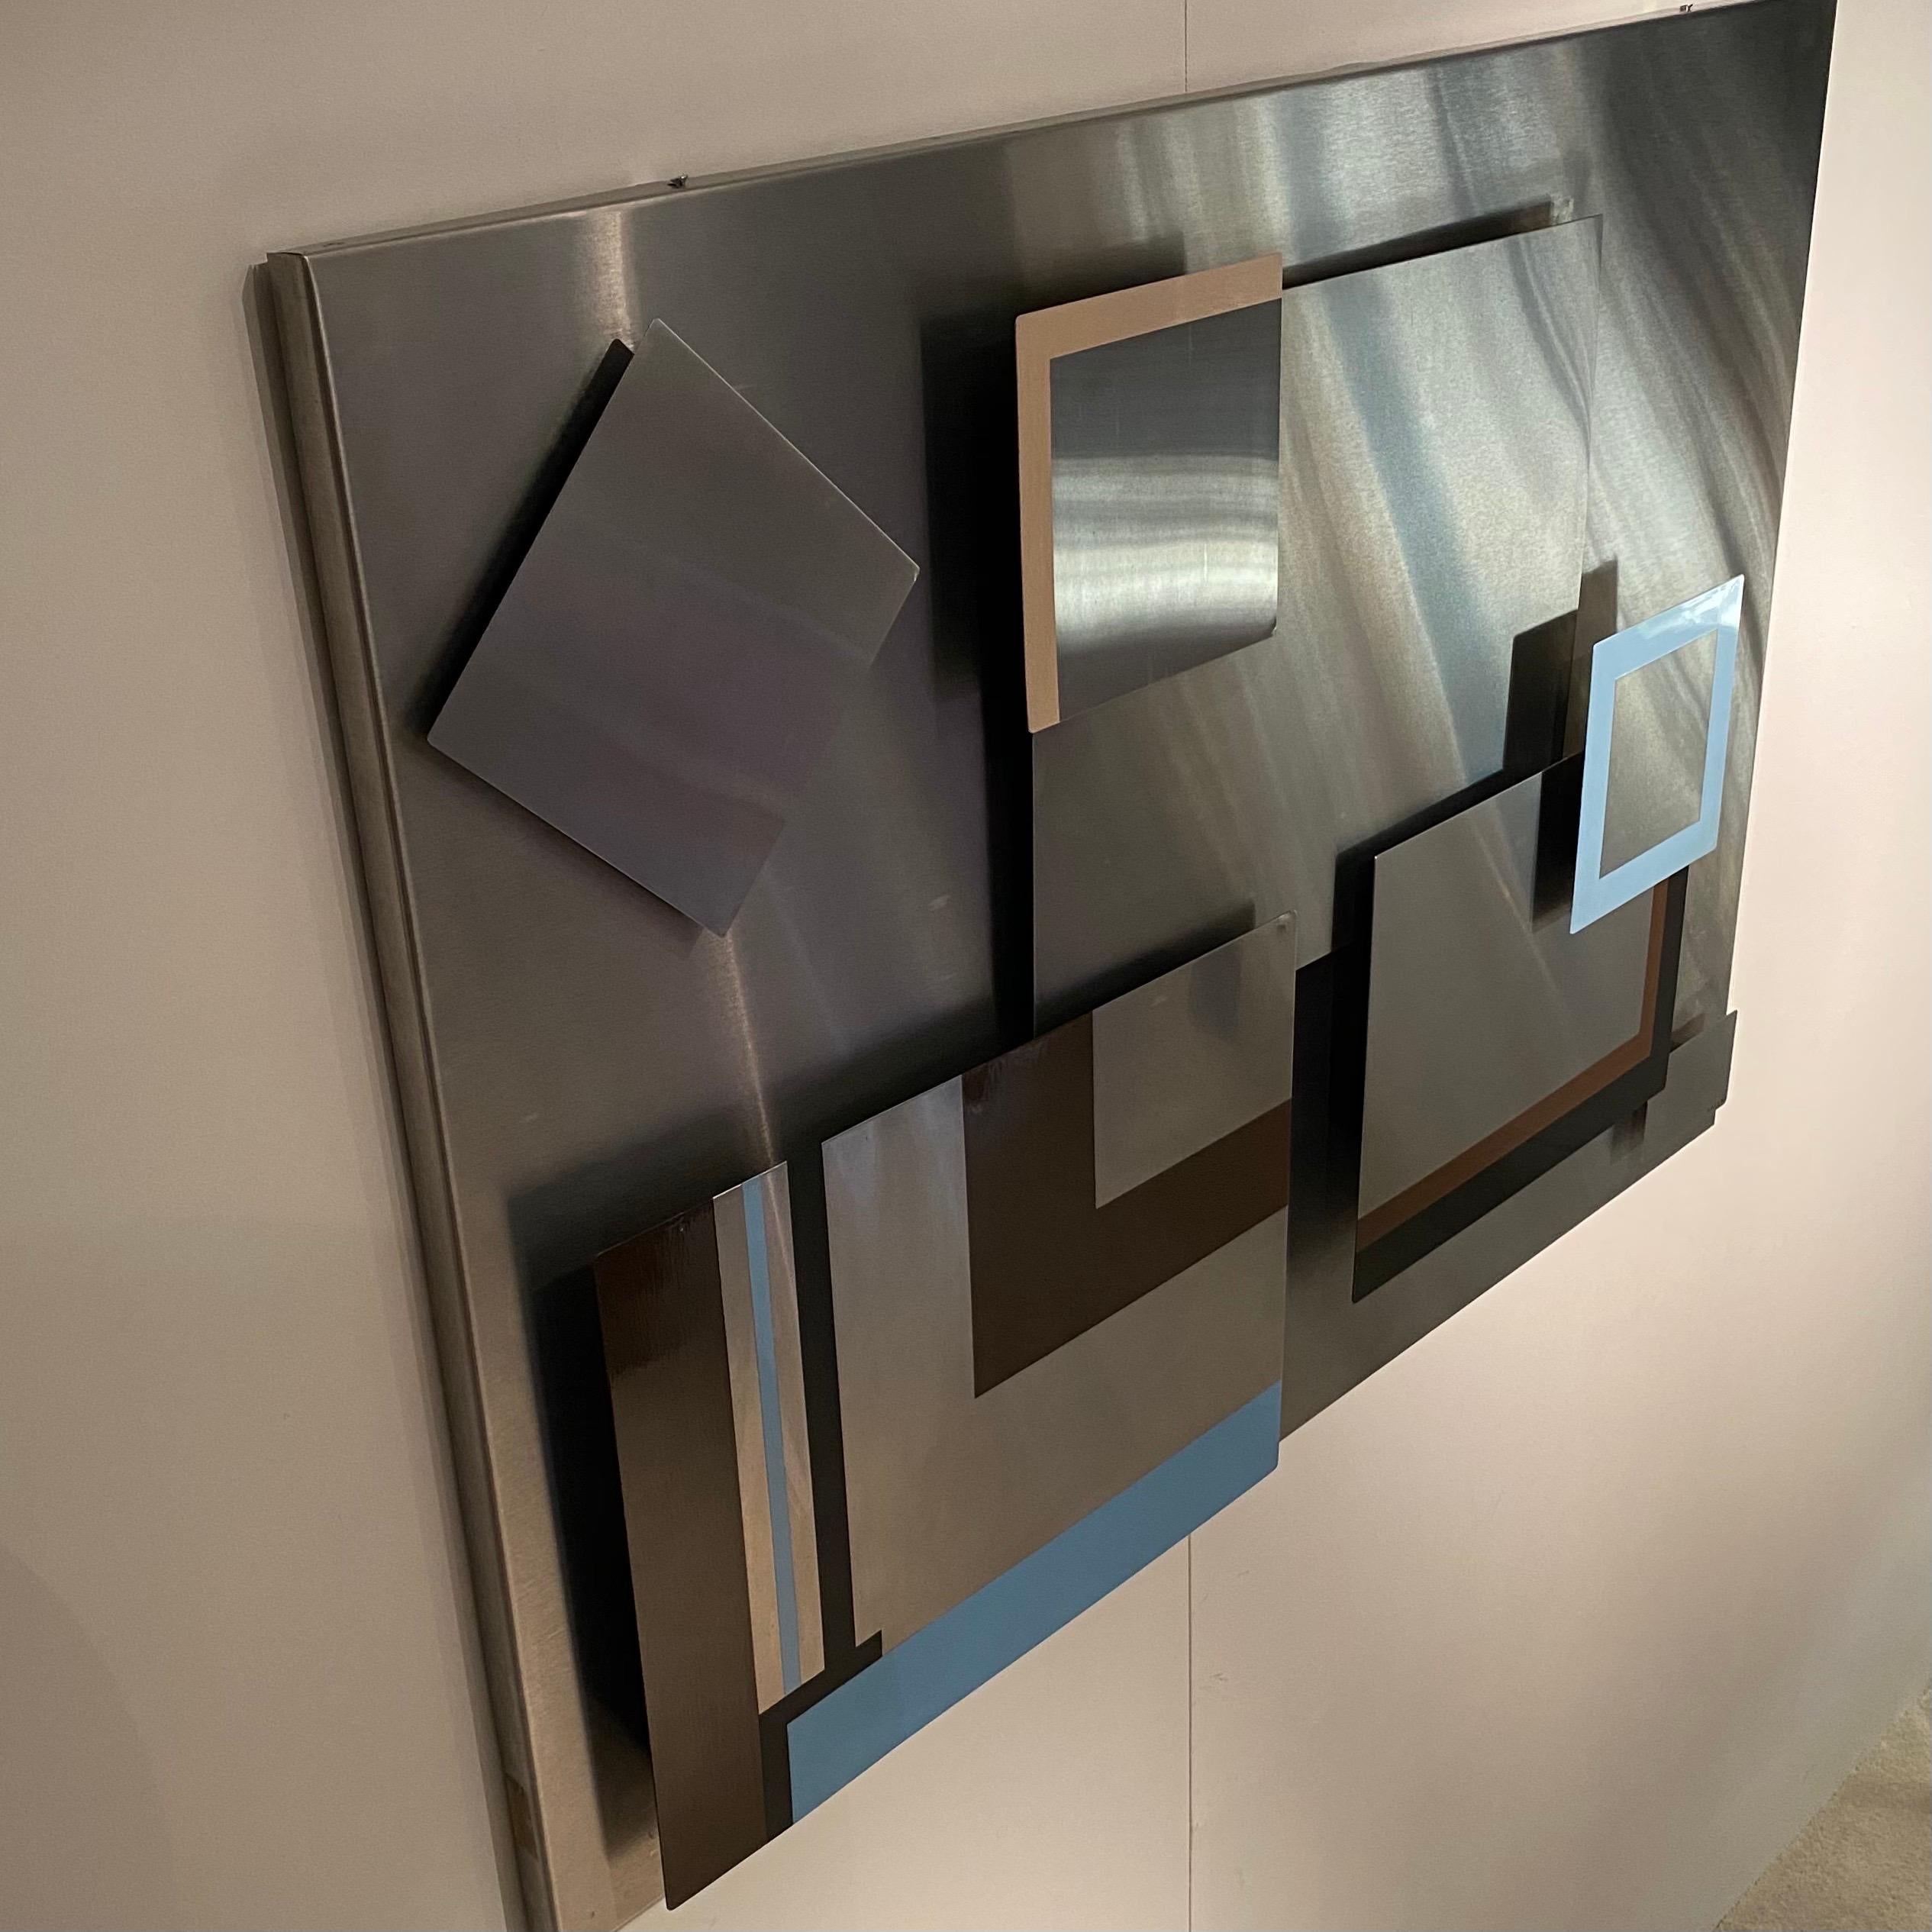 Magnetic panels in stainless steel whose Various elements are fixed by magnets.Geometric compositions in stainless steel and lacquered colors gives an abstract pictorial art.
Signed Orvan,1972.
In october 1970,the artist Orvan exhibited his works